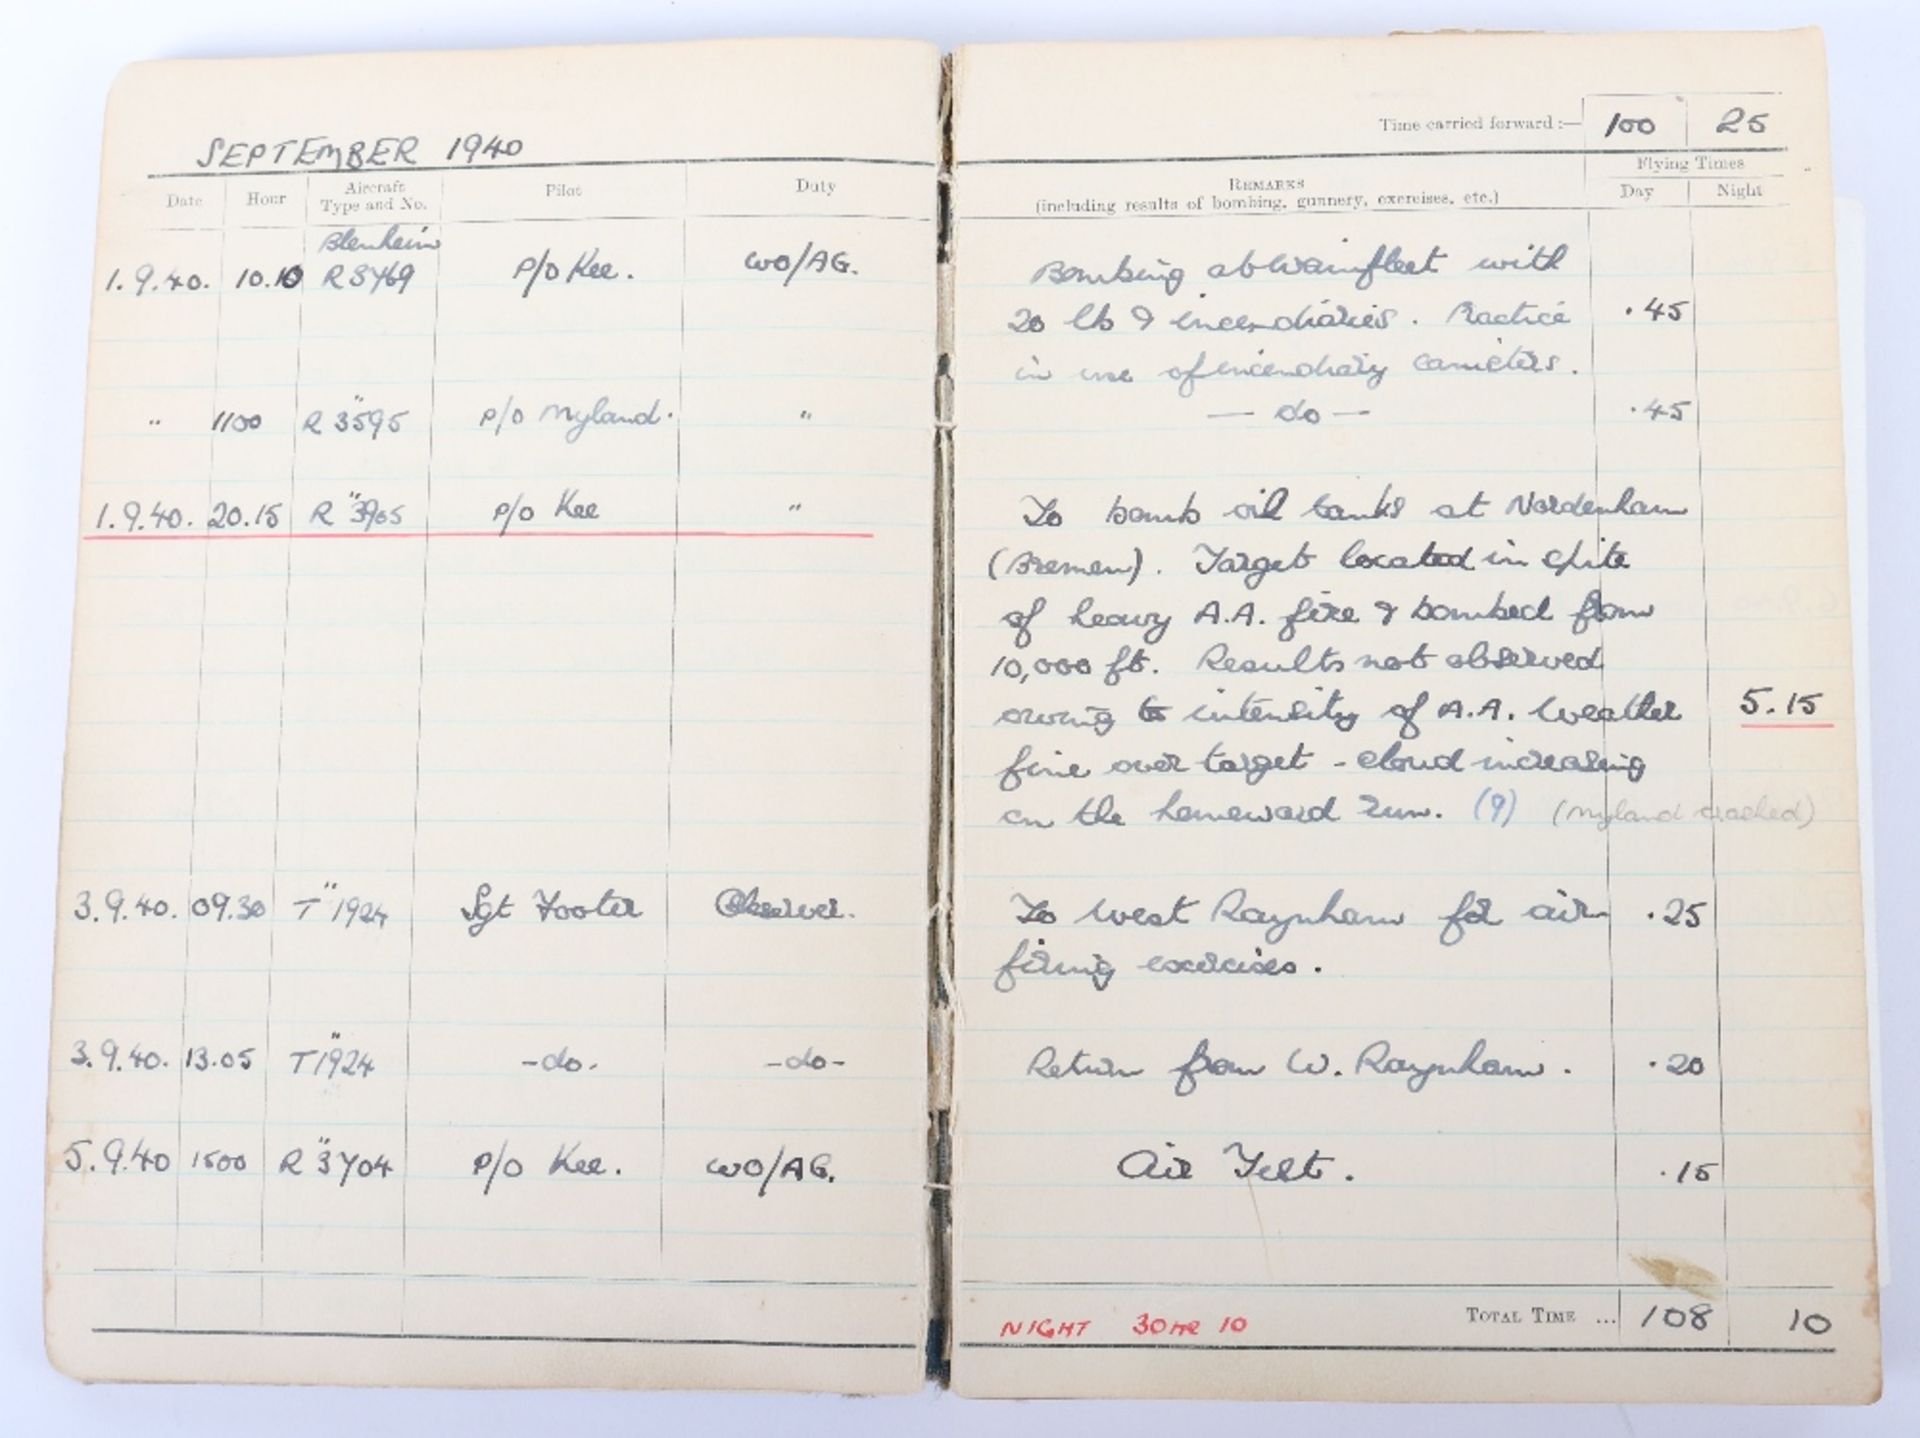 Royal Air Force Log Book Grouping of Flight Lieutenant E C Cox Number 15 and 29 Squadrons RAF, Serve - Image 22 of 87